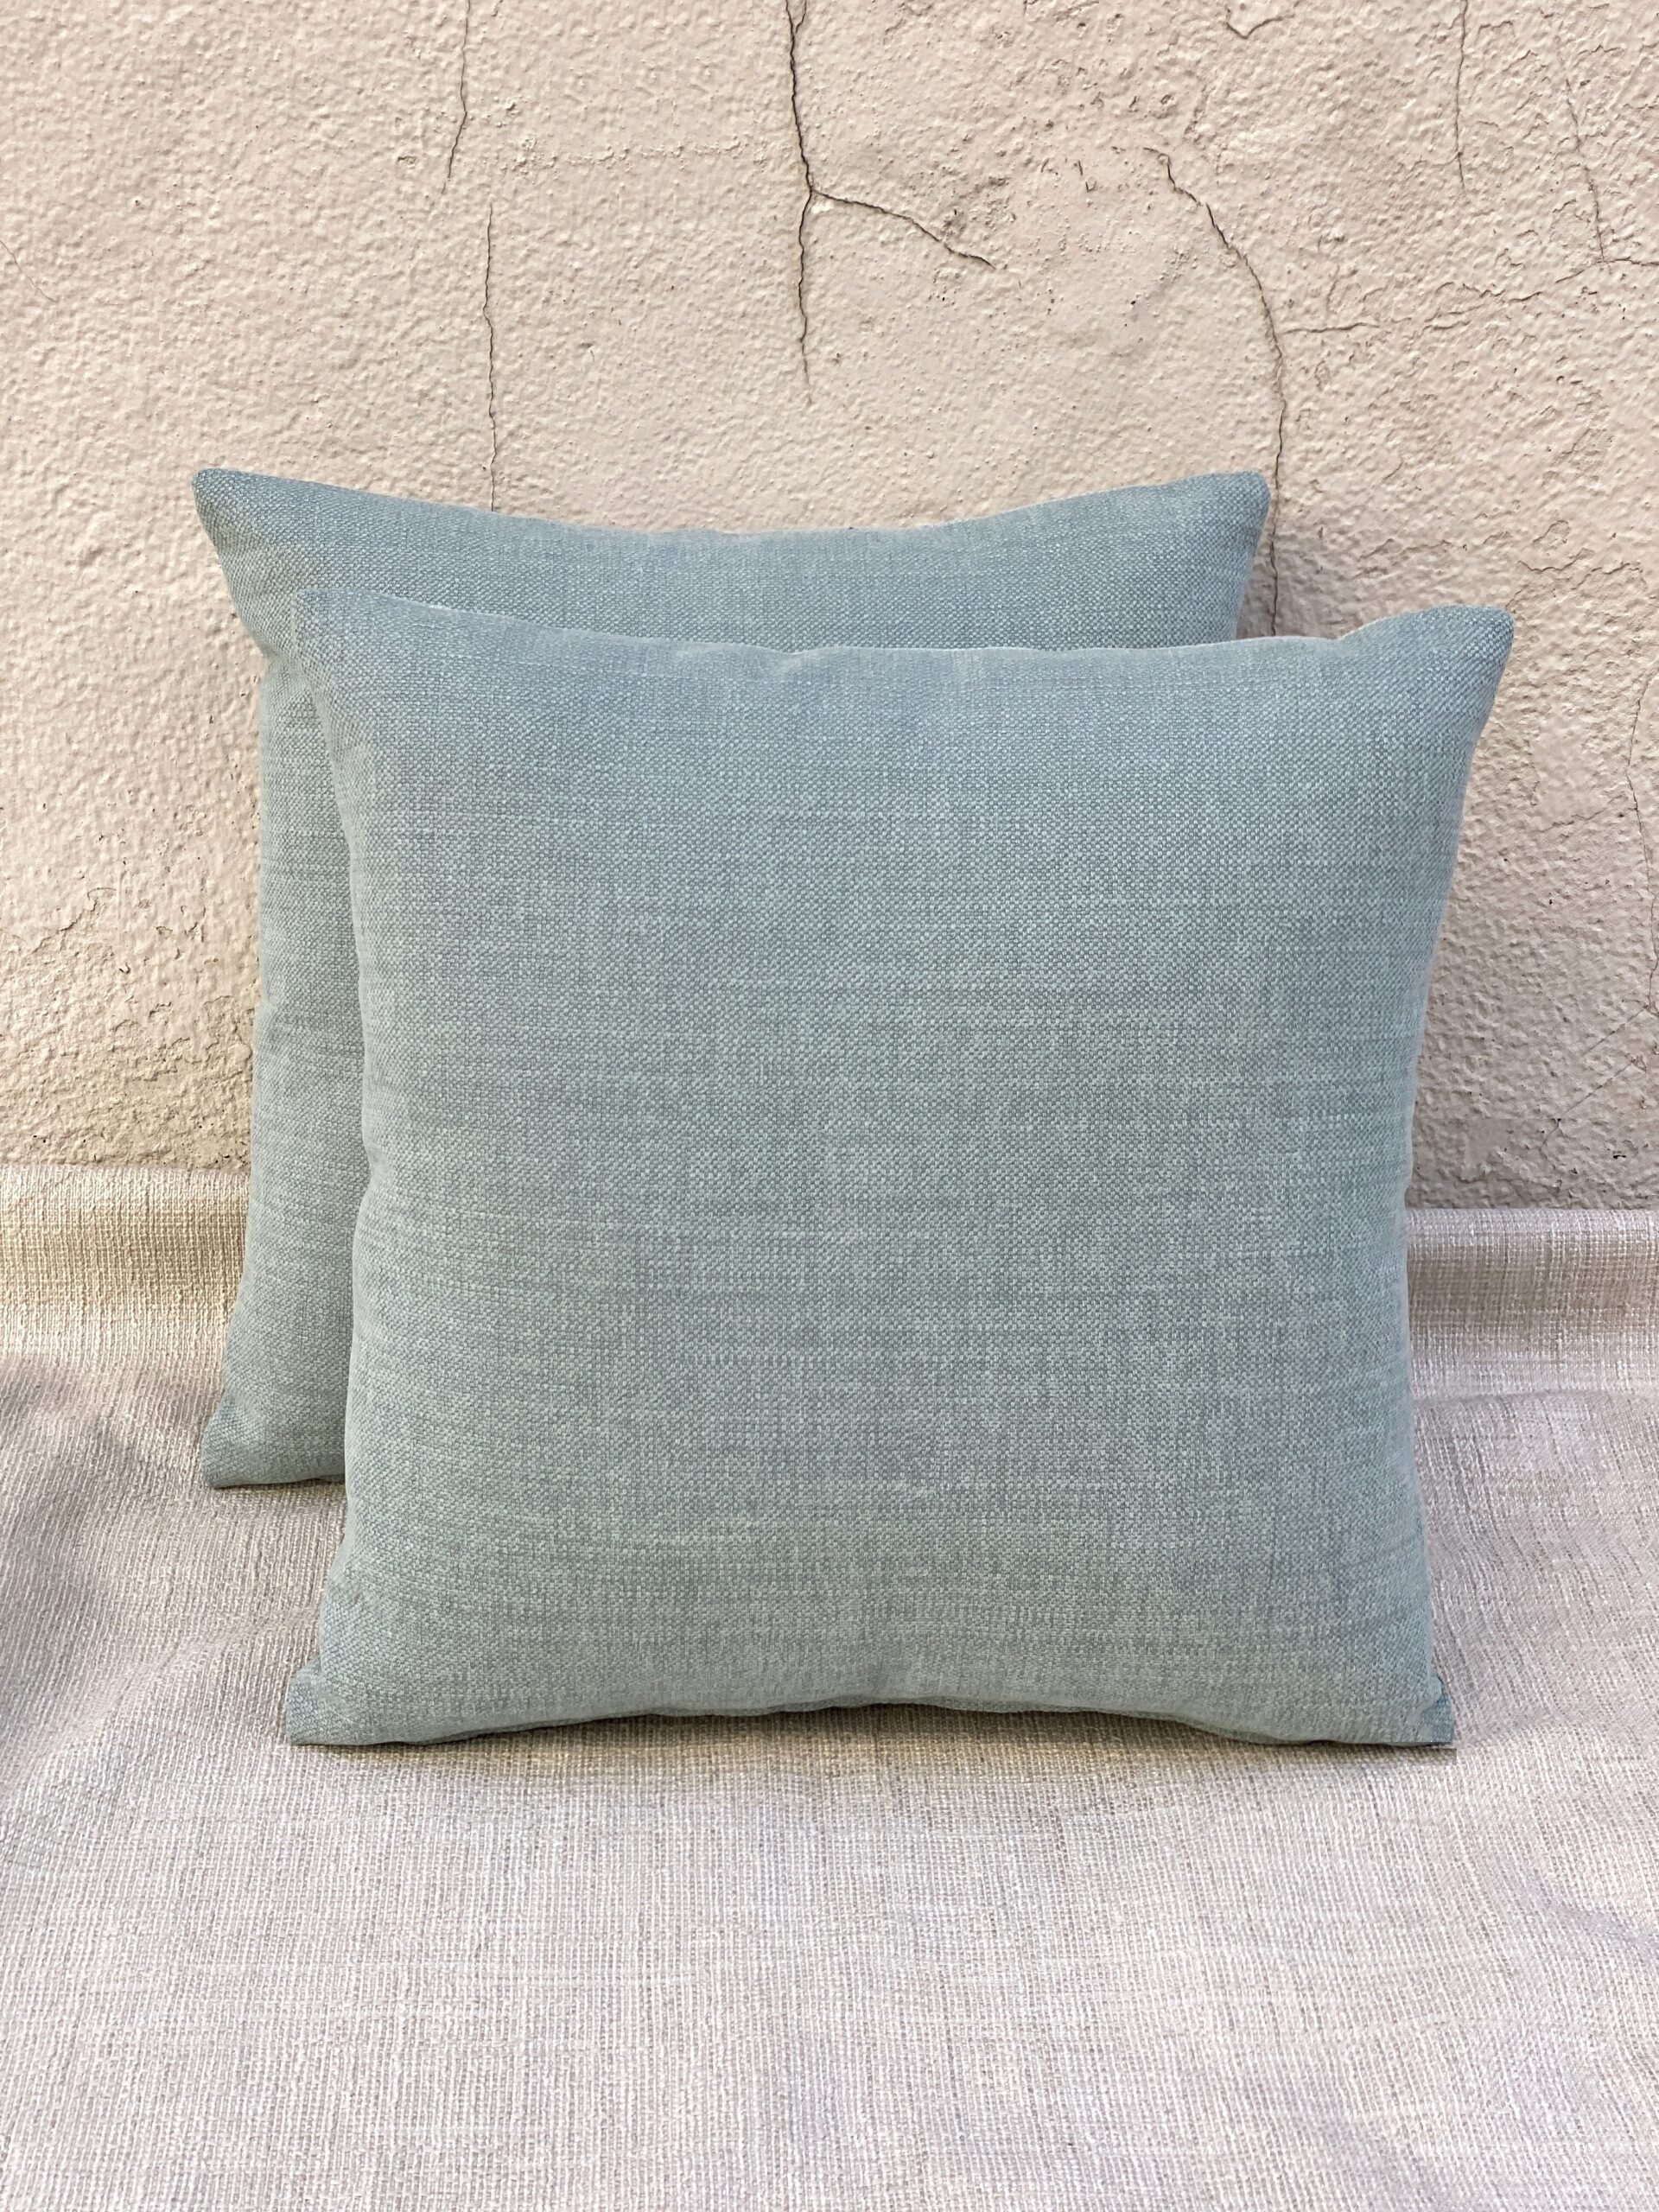 Design Lines Turquois Pillows